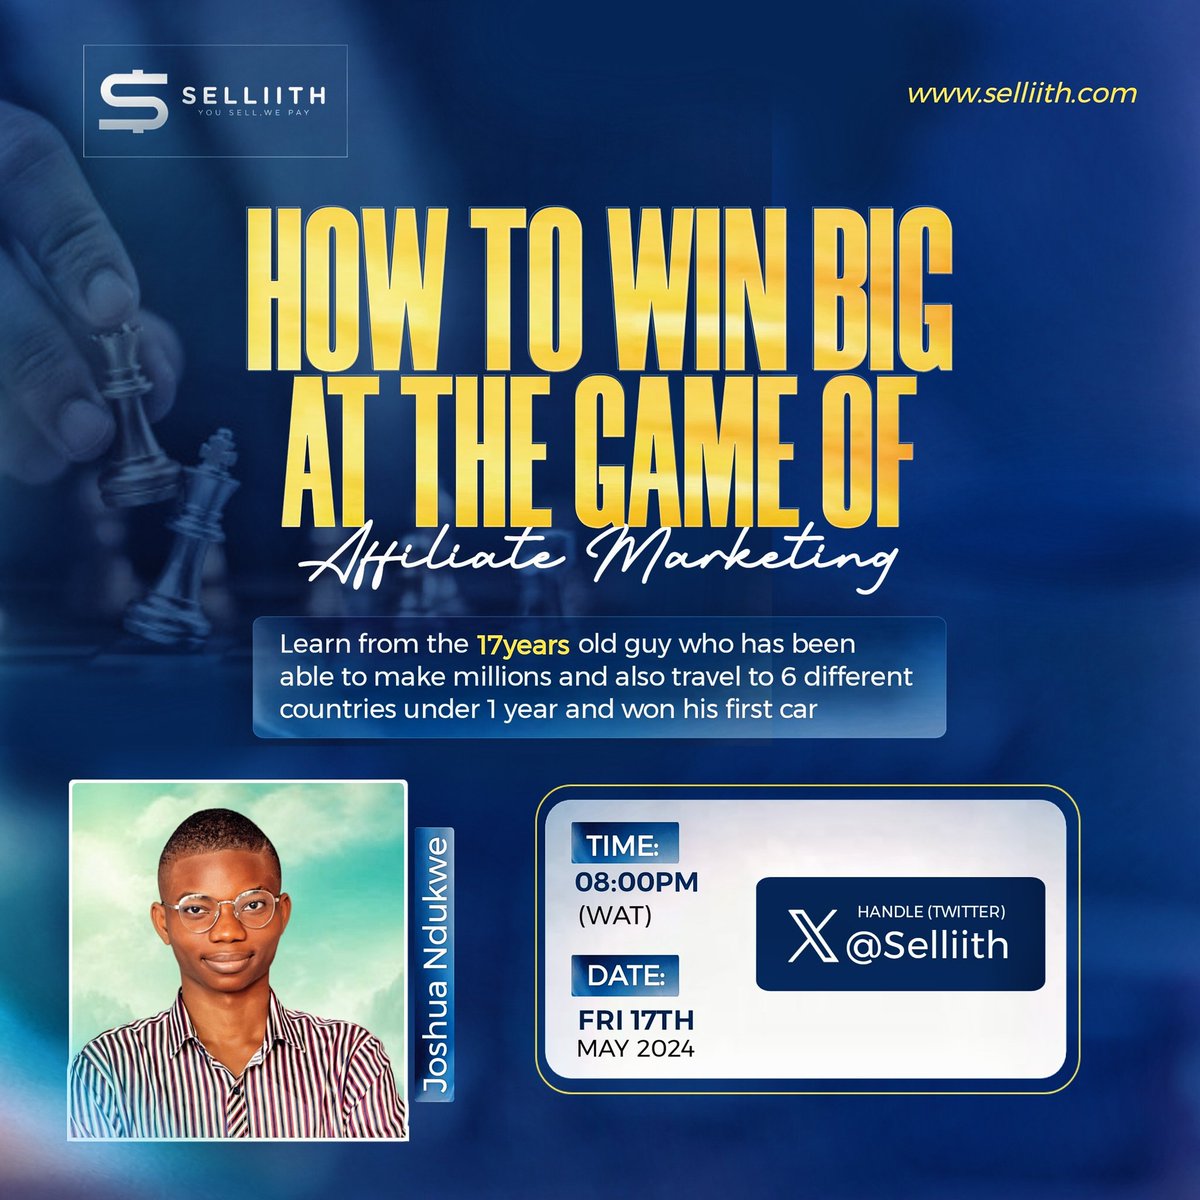 Join us this Friday, May 17th, 2024, by exactly 8PM on Selliith's X Space for An exclusive session with @Coach_Joshua1, a sales expert. Title: 'How to Win Big at the Game of Affiliate Marketing' Learn from the 17-year-old guy who has made millions, traveled to 6 different